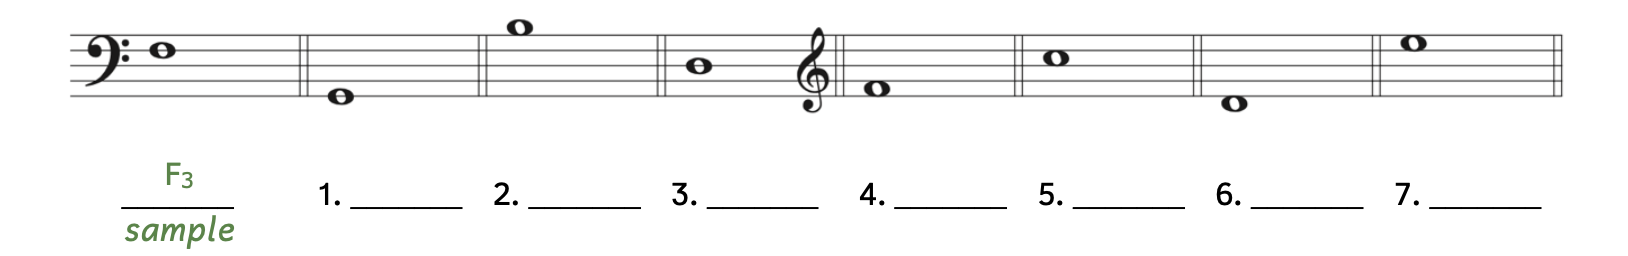 Exercise asking to identify pitches with octave designations. Numbers 1 through 3 are in the bass clef. The sample is on the fourth line and the sample's answer is F3. Number 1 is on the first line. Number 2 is in the space above the staff. Number 3 is on the third line. Numbers 4 through 7 are in the treble clef. Number 4 is in the first space. Number 5 is in the third space. Number 6 is in the space below the staff. Number 7 is in the fourth space.